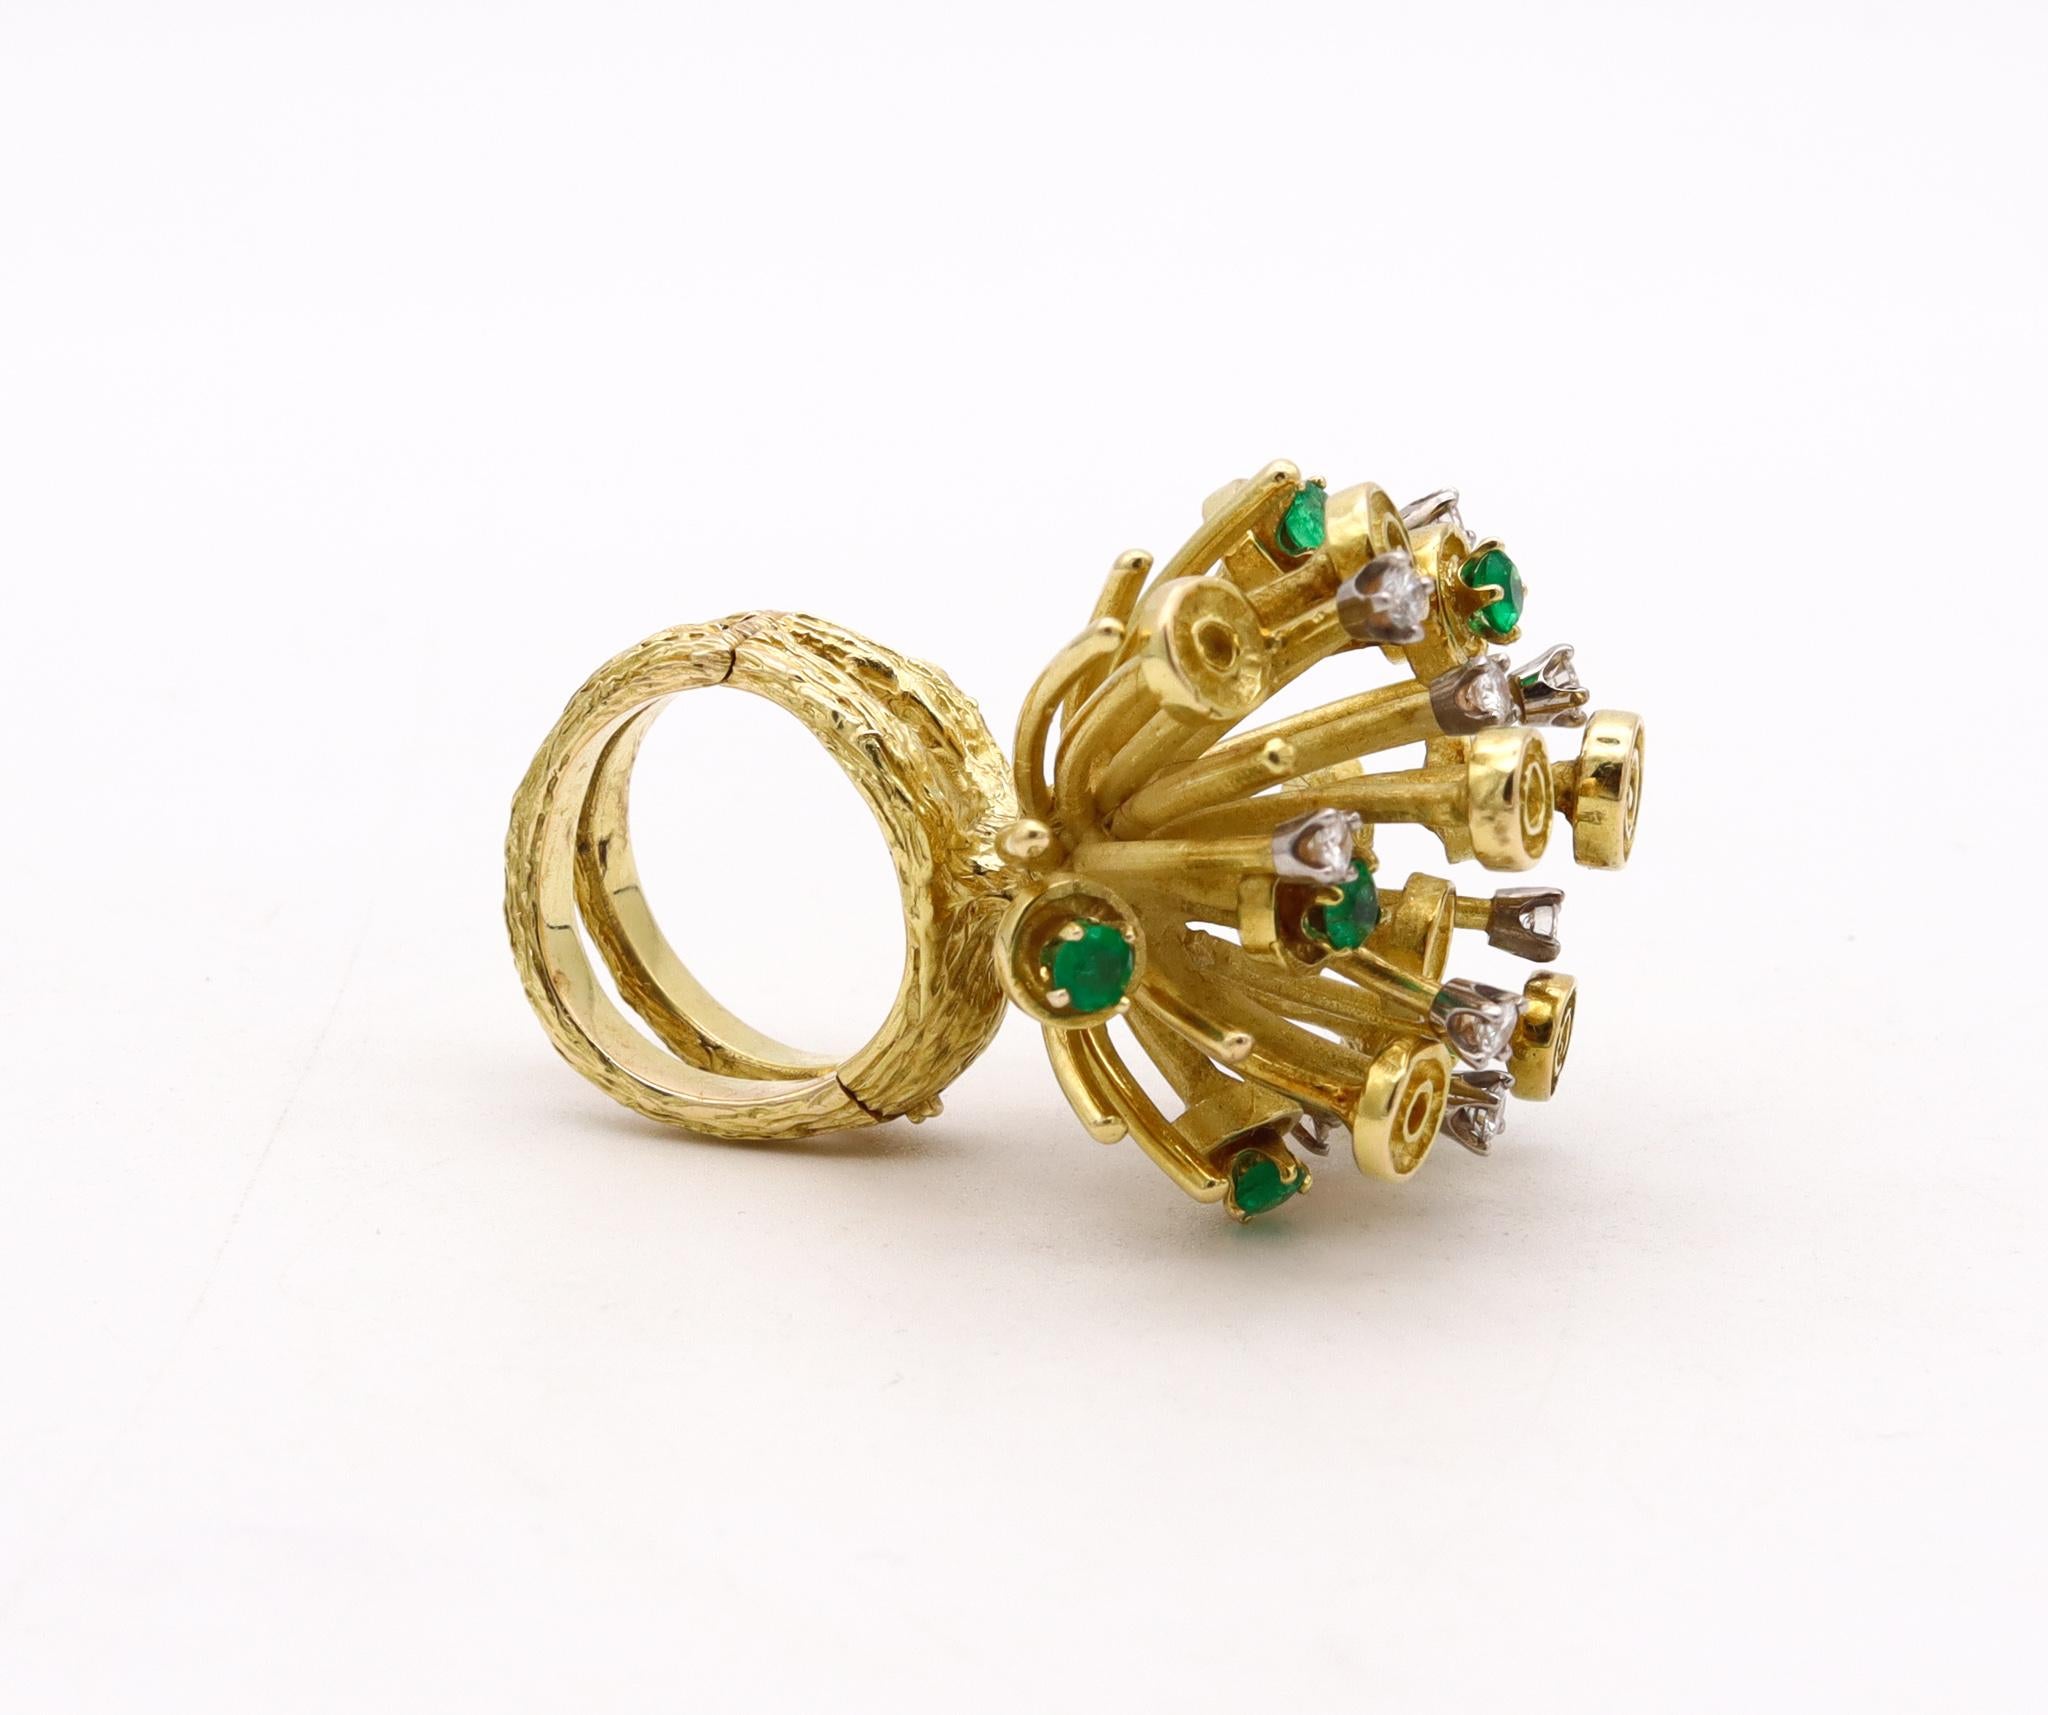 Scandinavian 1960 Sculptural Spikes Ring 18Kt Gold 1.38 Cts Diamonds Emeralds In Excellent Condition For Sale In Miami, FL